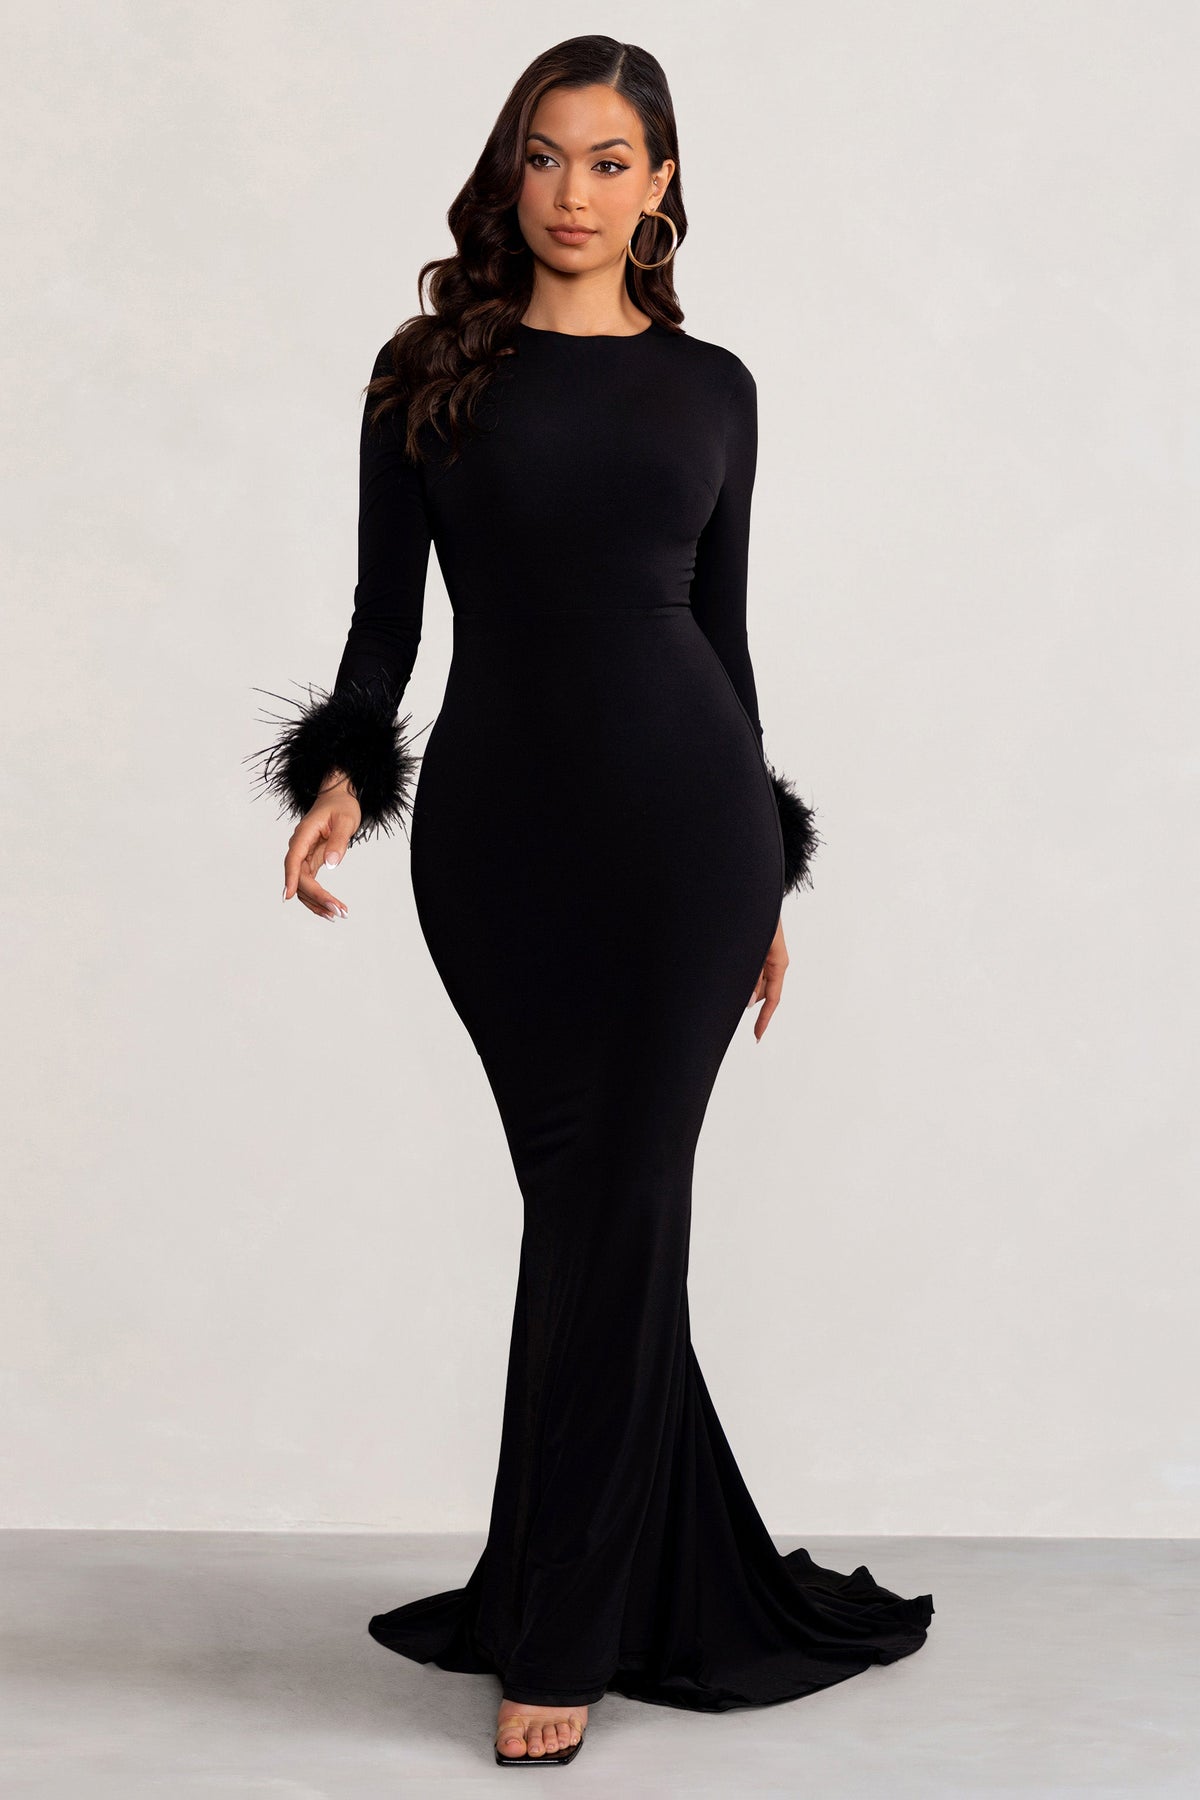 Long Sleeve African Black Sexy Black Evening Gown With Beading For Womens  Special Occasions Perfect For Gala, Party, And Prom From Veralove999,  $117.52 | DHgate.Com